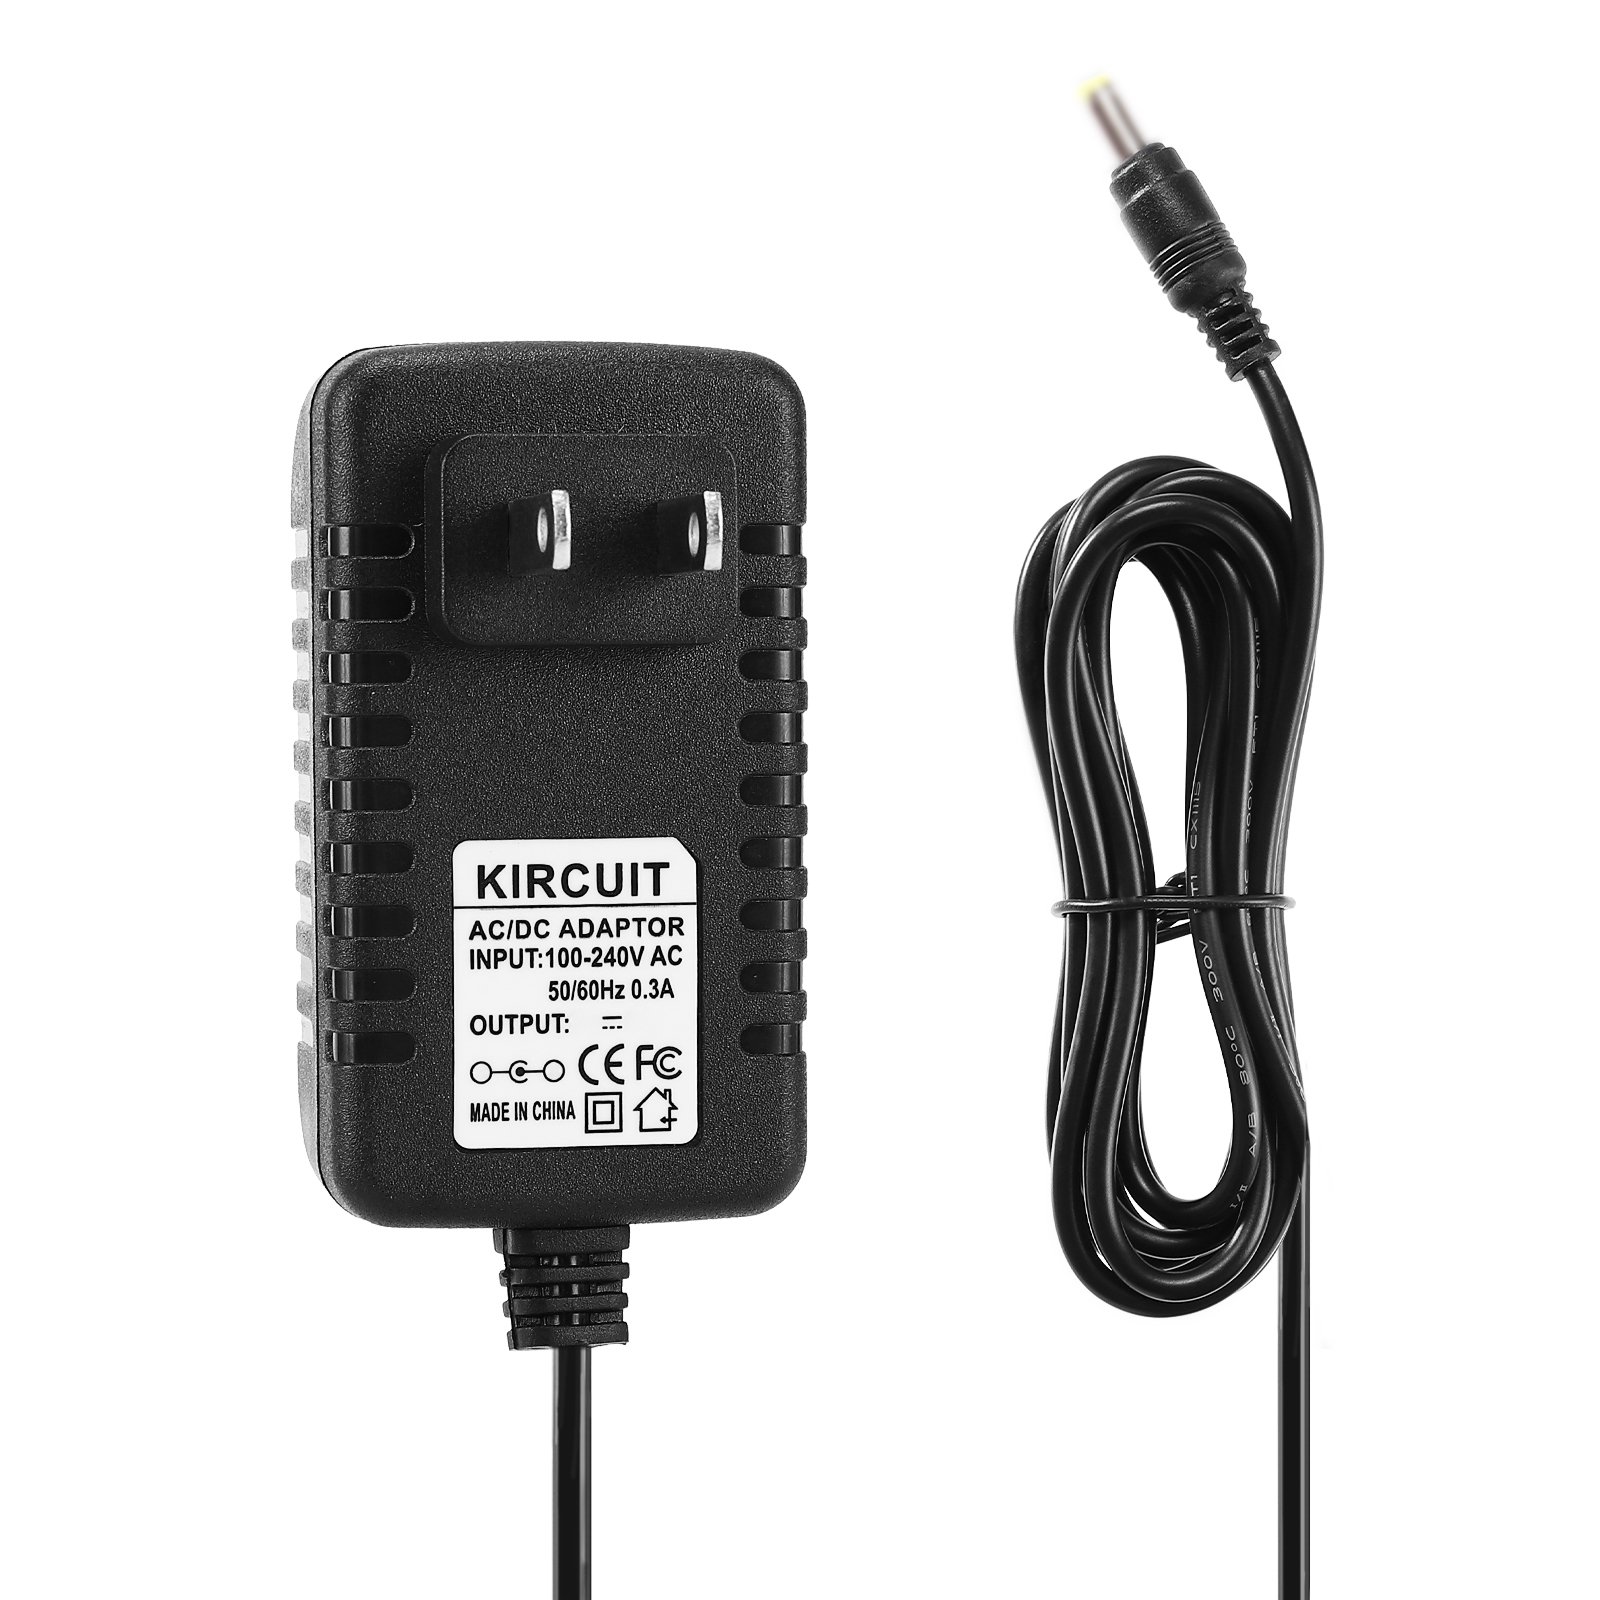 Kircuit New 5V AC/DC Adapter Compatible with Logitech Harmony Adapter PS3 943-000029 (Sony Playstation 3) 5VDC Power Supply Cord Cable PS Wall Home Battery Charger Mains PSU - image 1 of 4